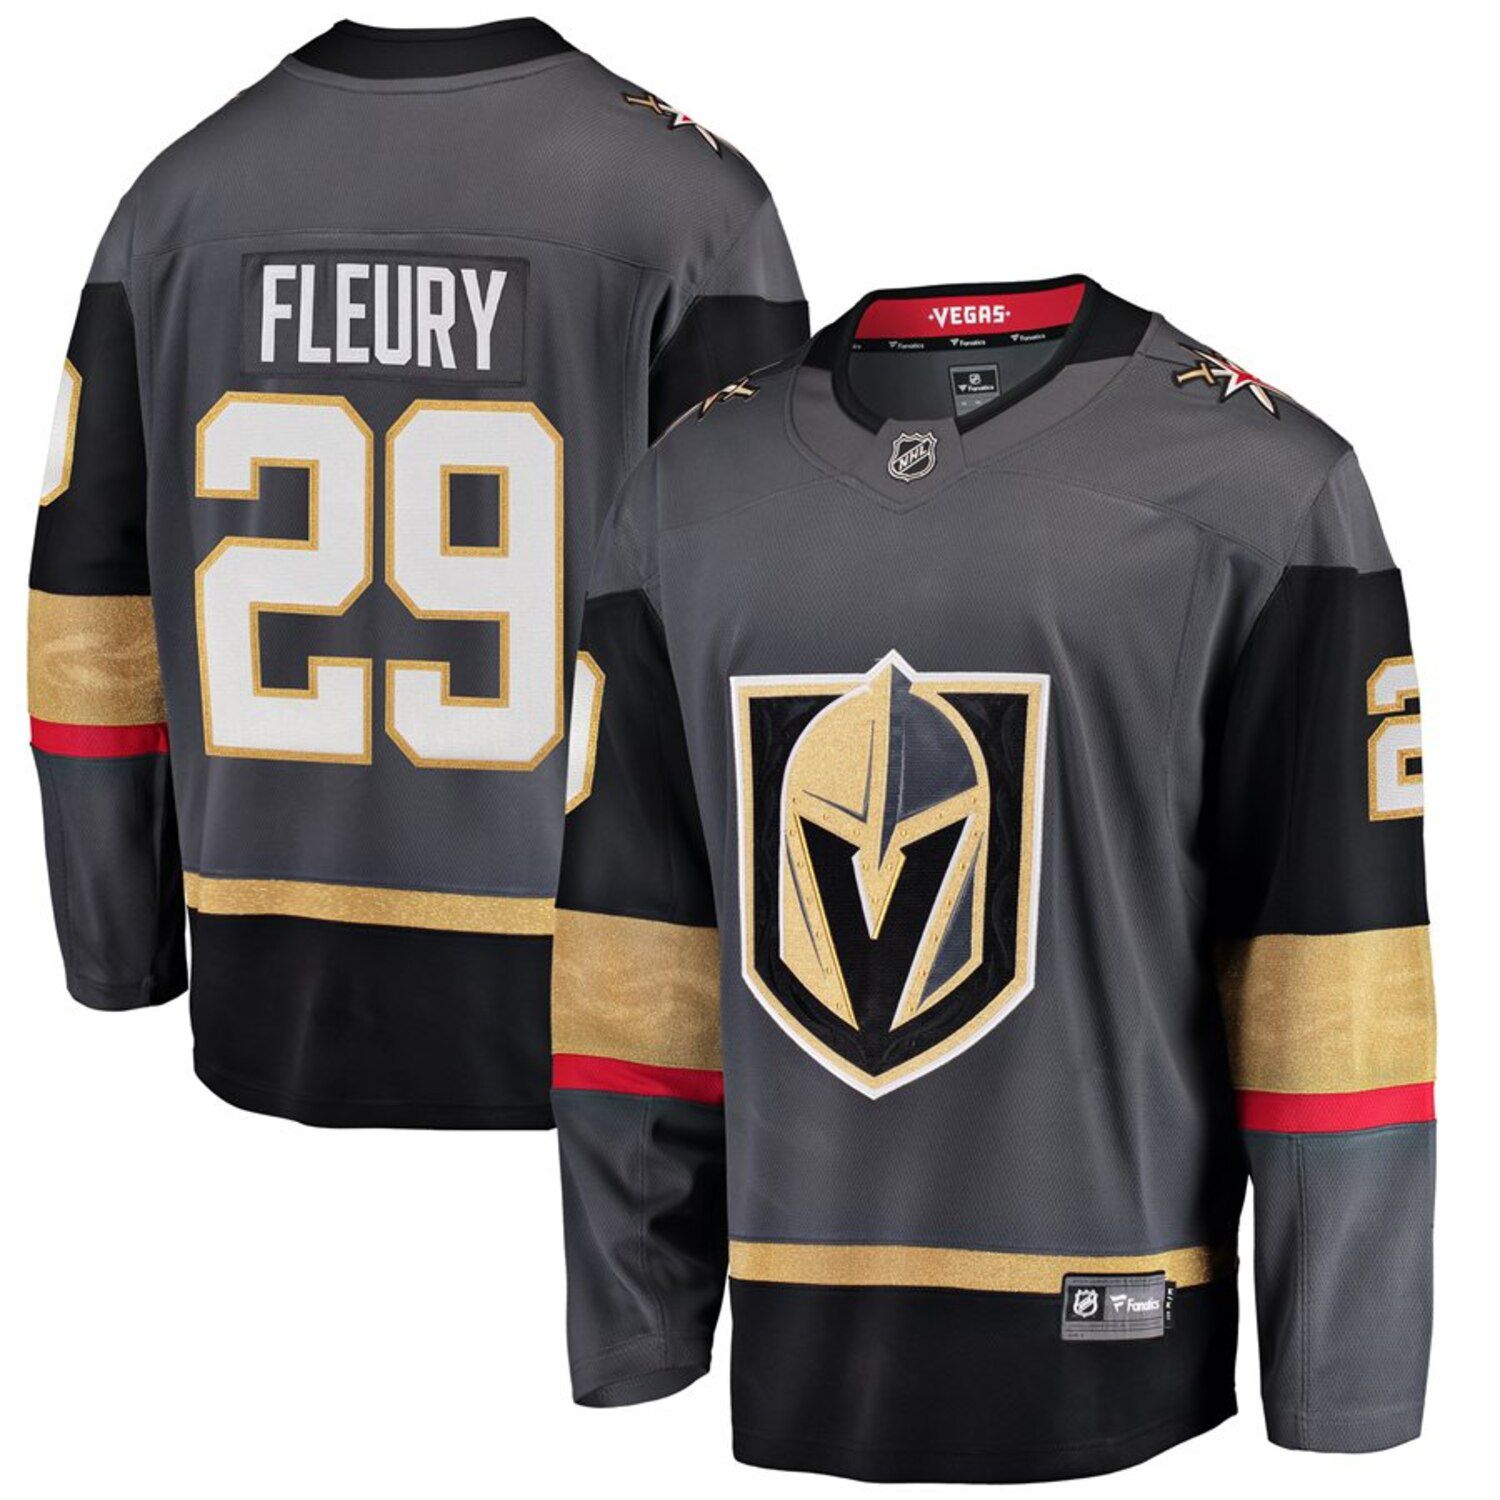 fleury youth jersey